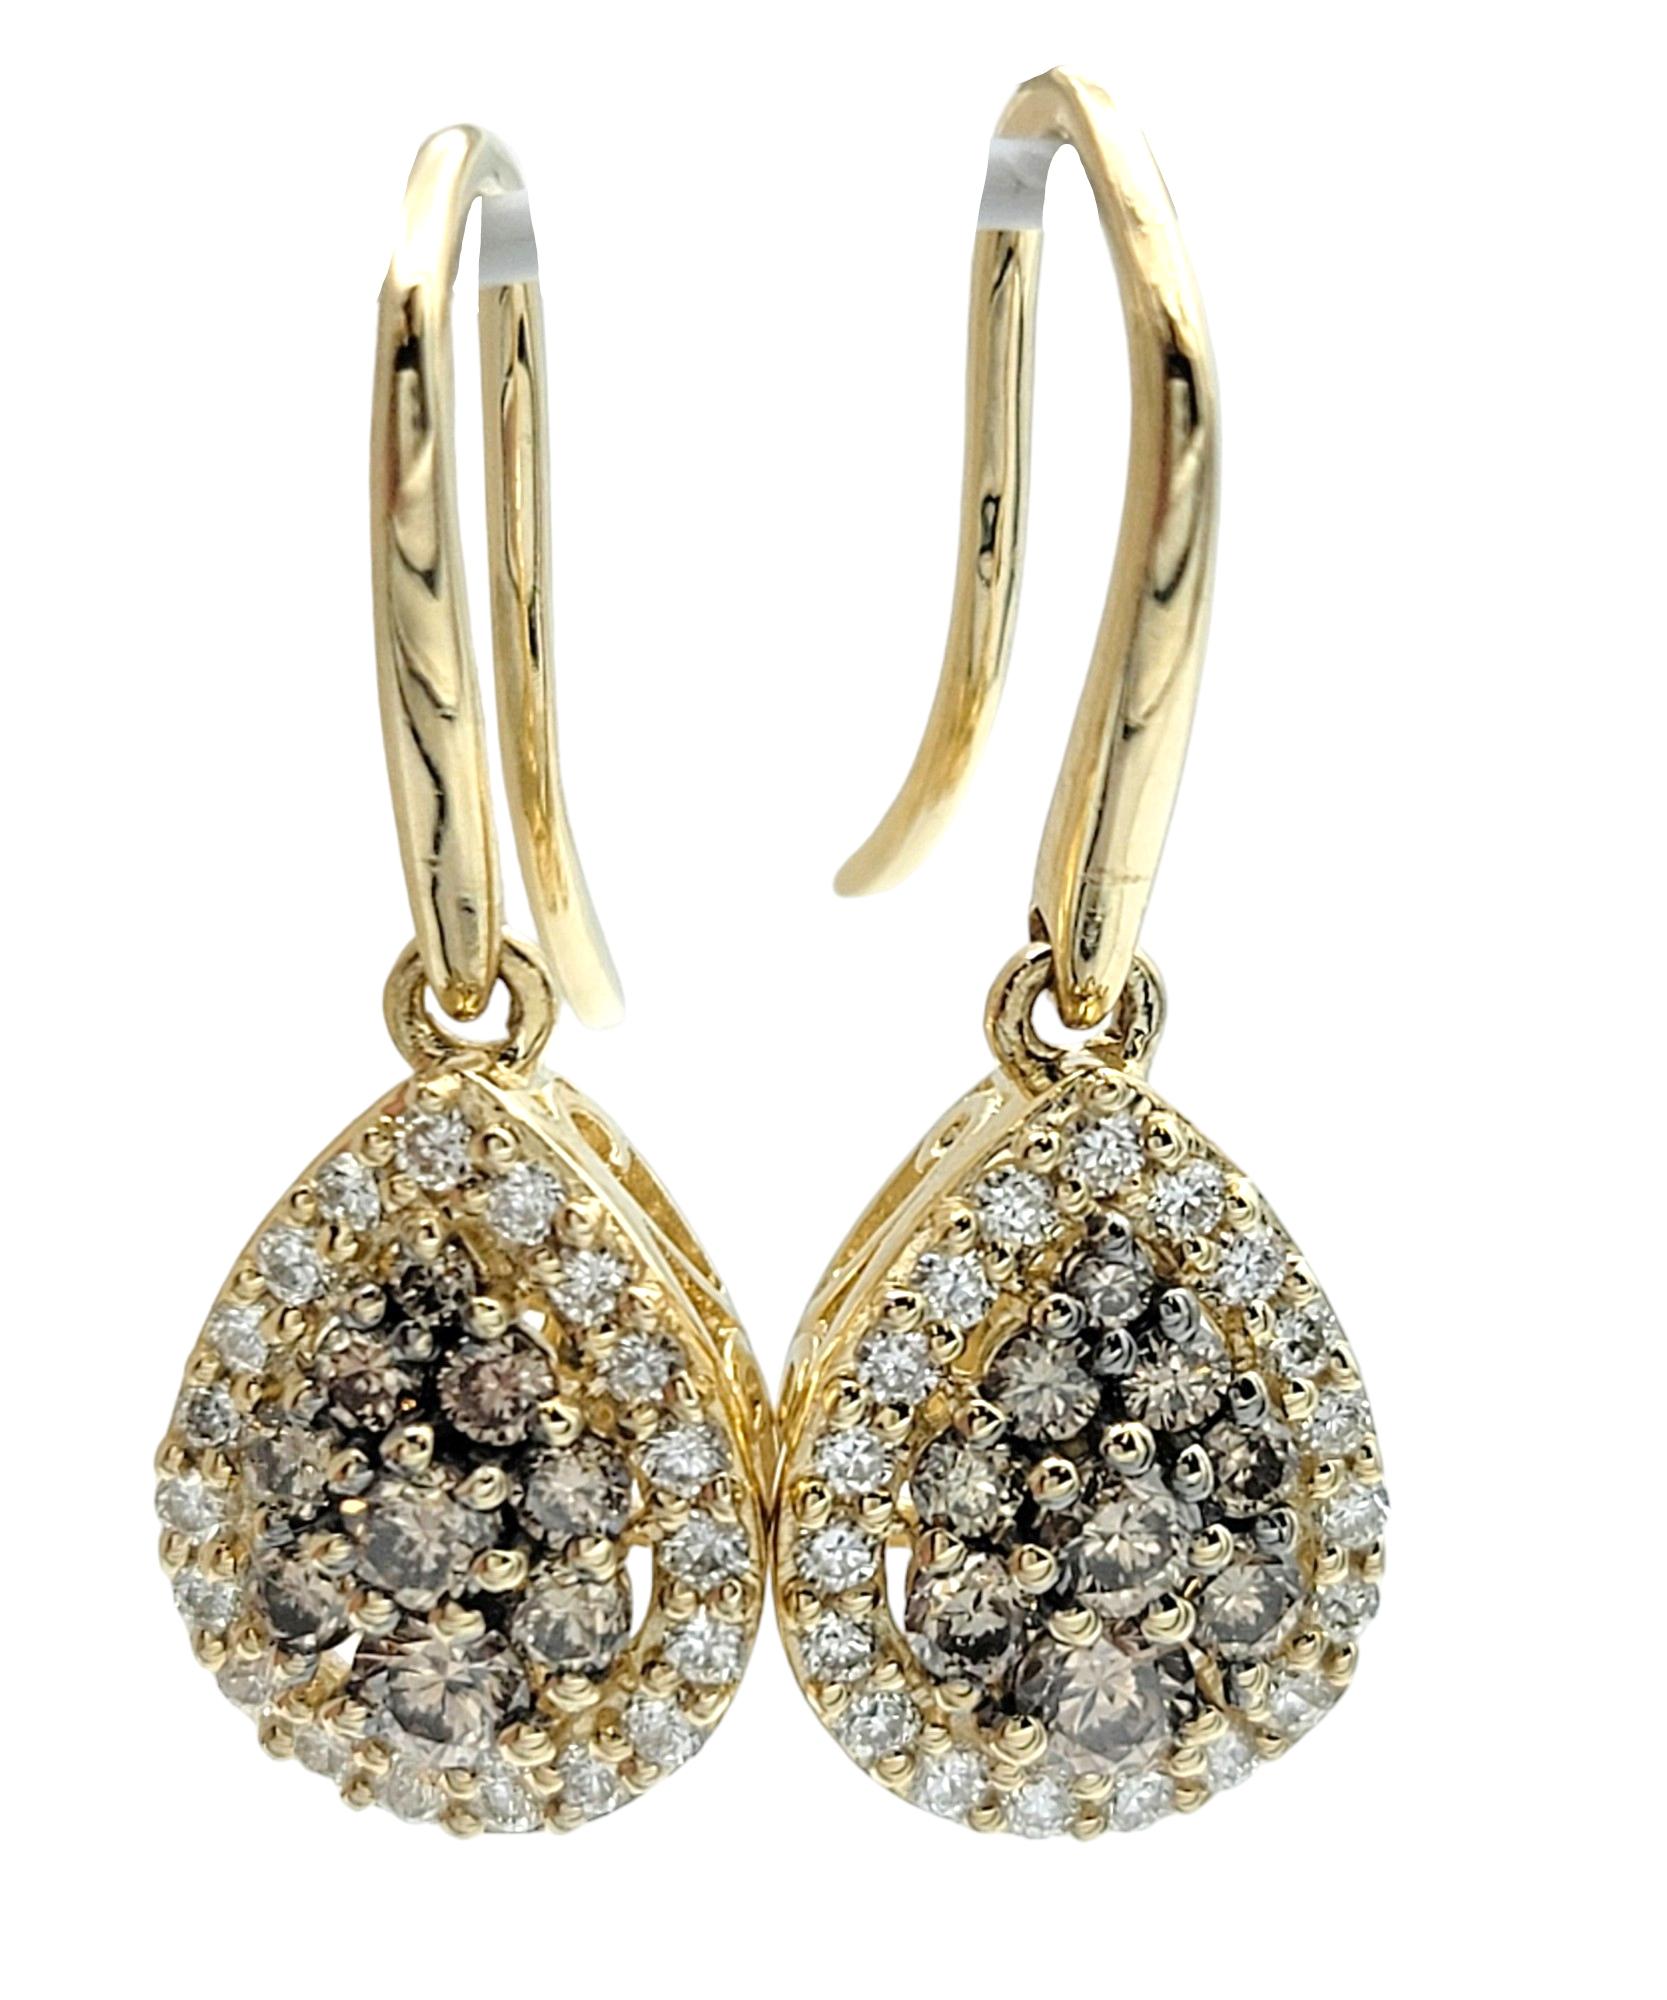 These Le Vian earrings, set in luxurious 14 karat yellow gold, are a true embodiment of elegance and sophistication. The focal point of each earring features a cluster of chocolate diamonds arranged in a pear-shaped formation, adding a rich and